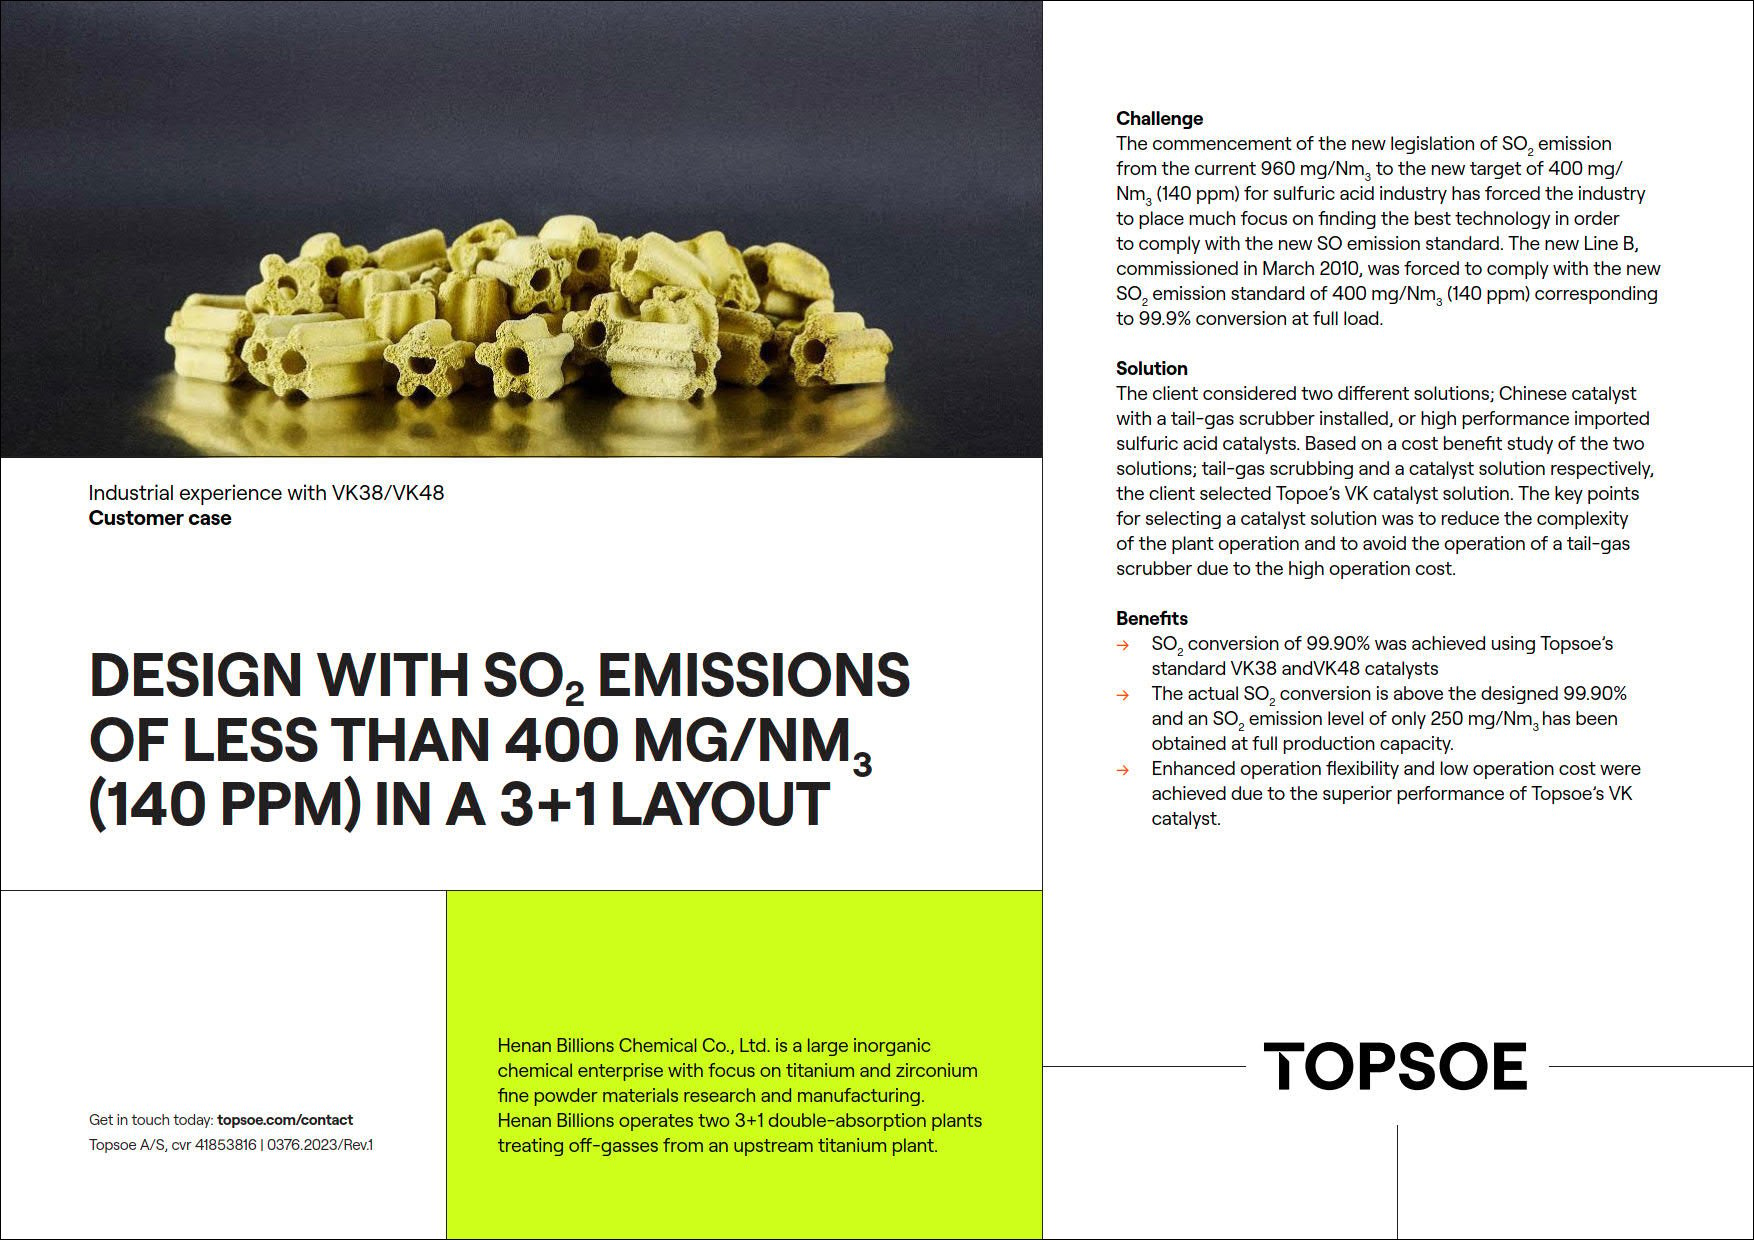 Design with so2 emissions of less than 400 mg/nm3 (140 ppm) in a 3+1 layout